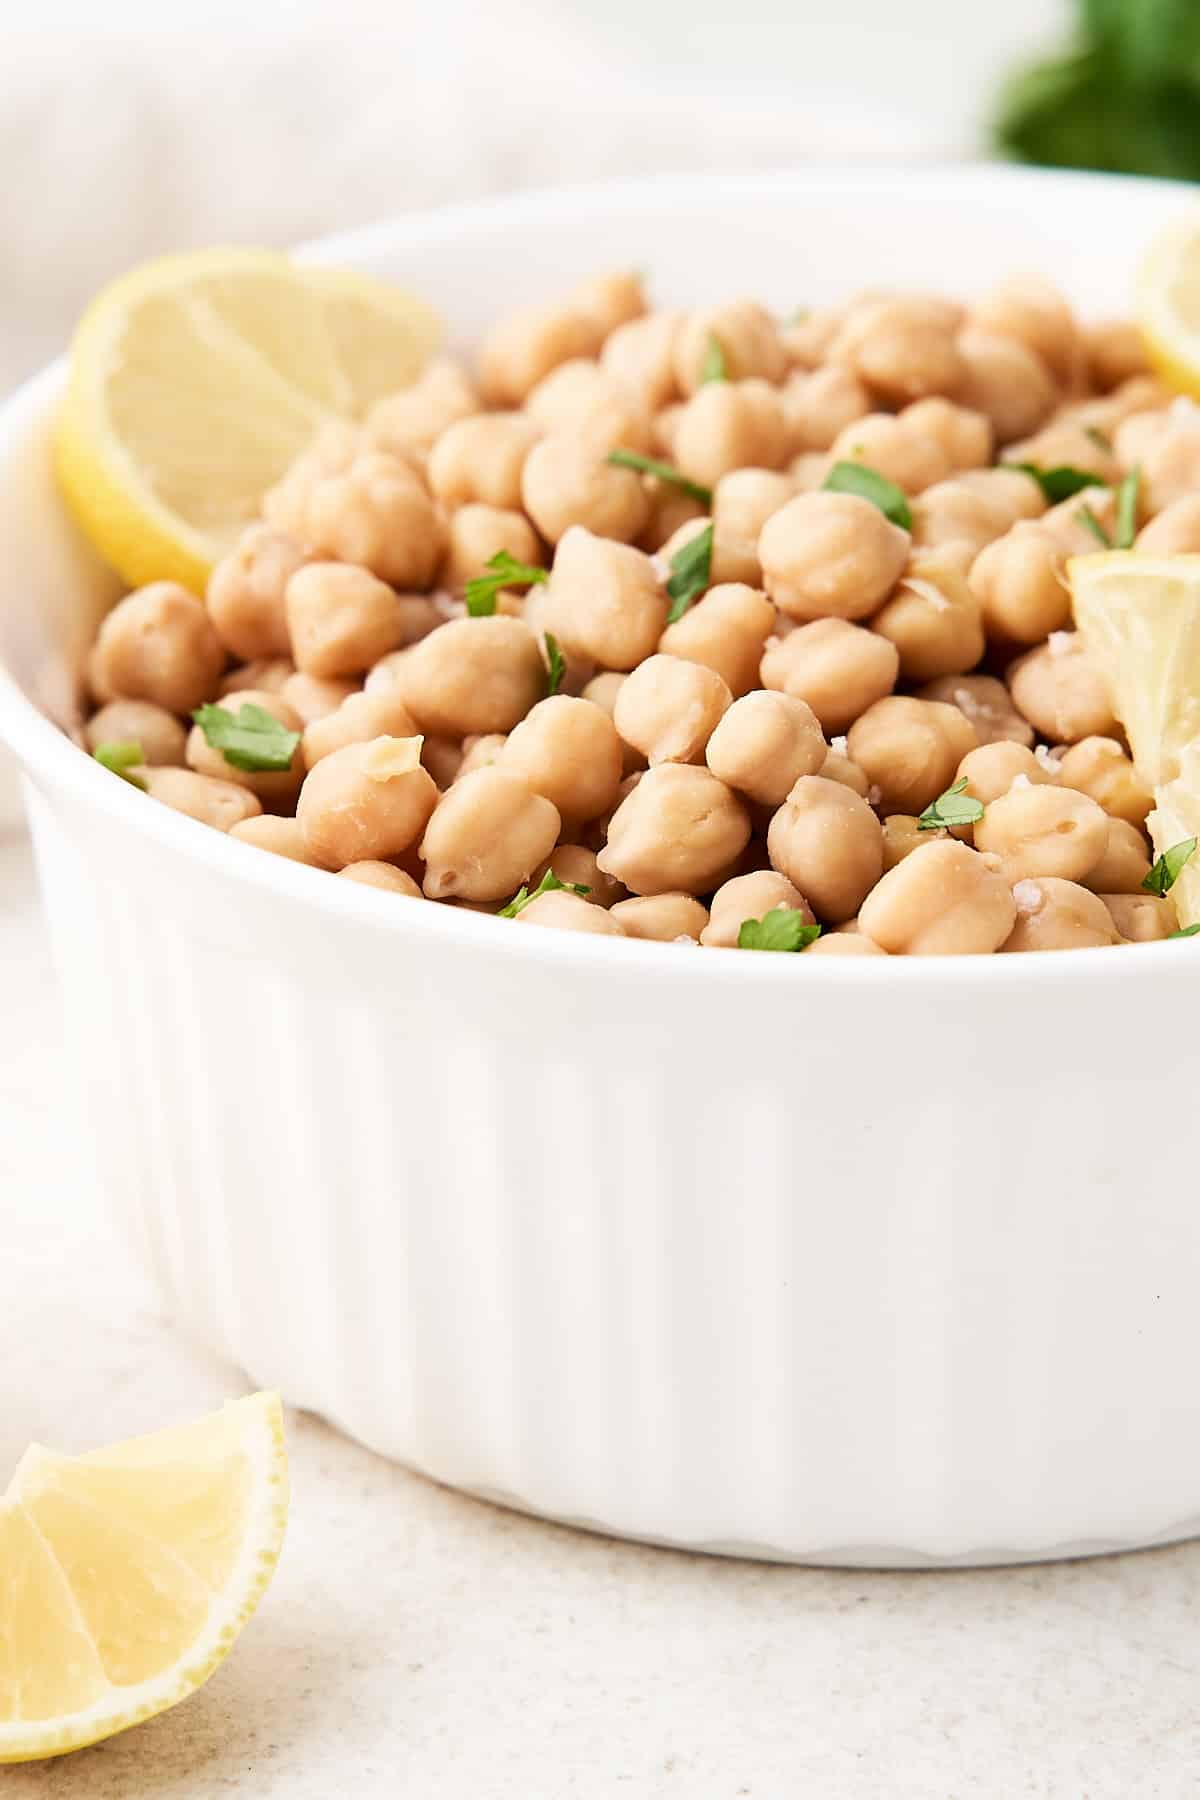 Chickpeas garnishes with lemon and parsley.